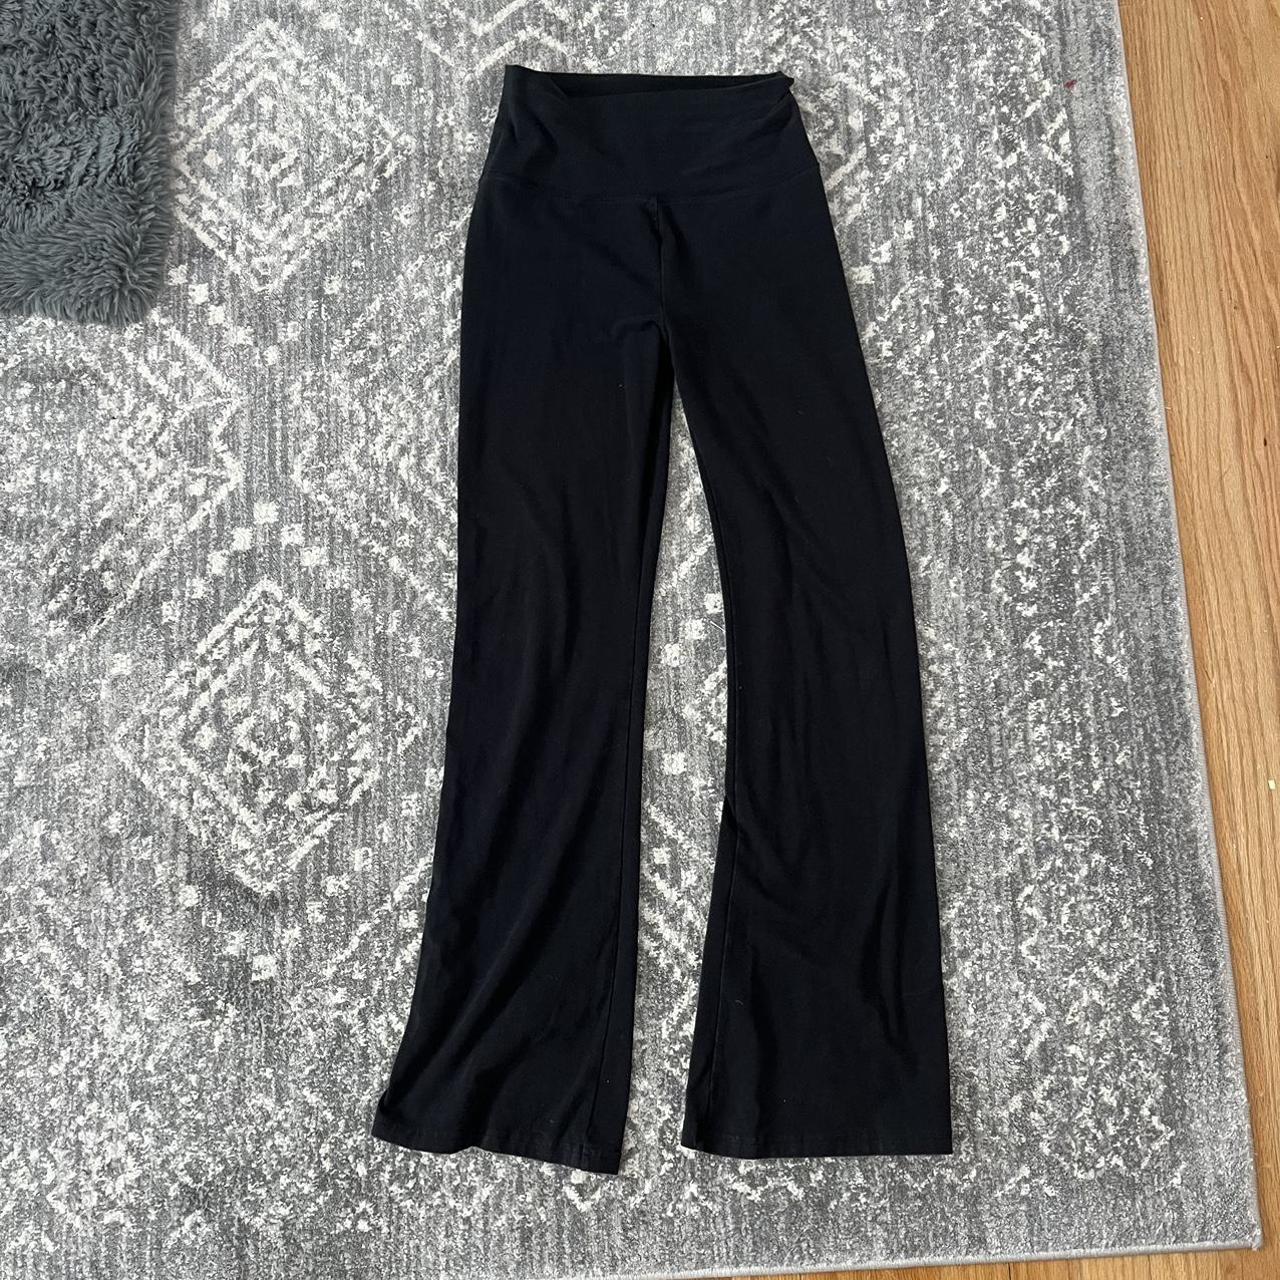 Aerie black flare leggings size small perfect - Depop